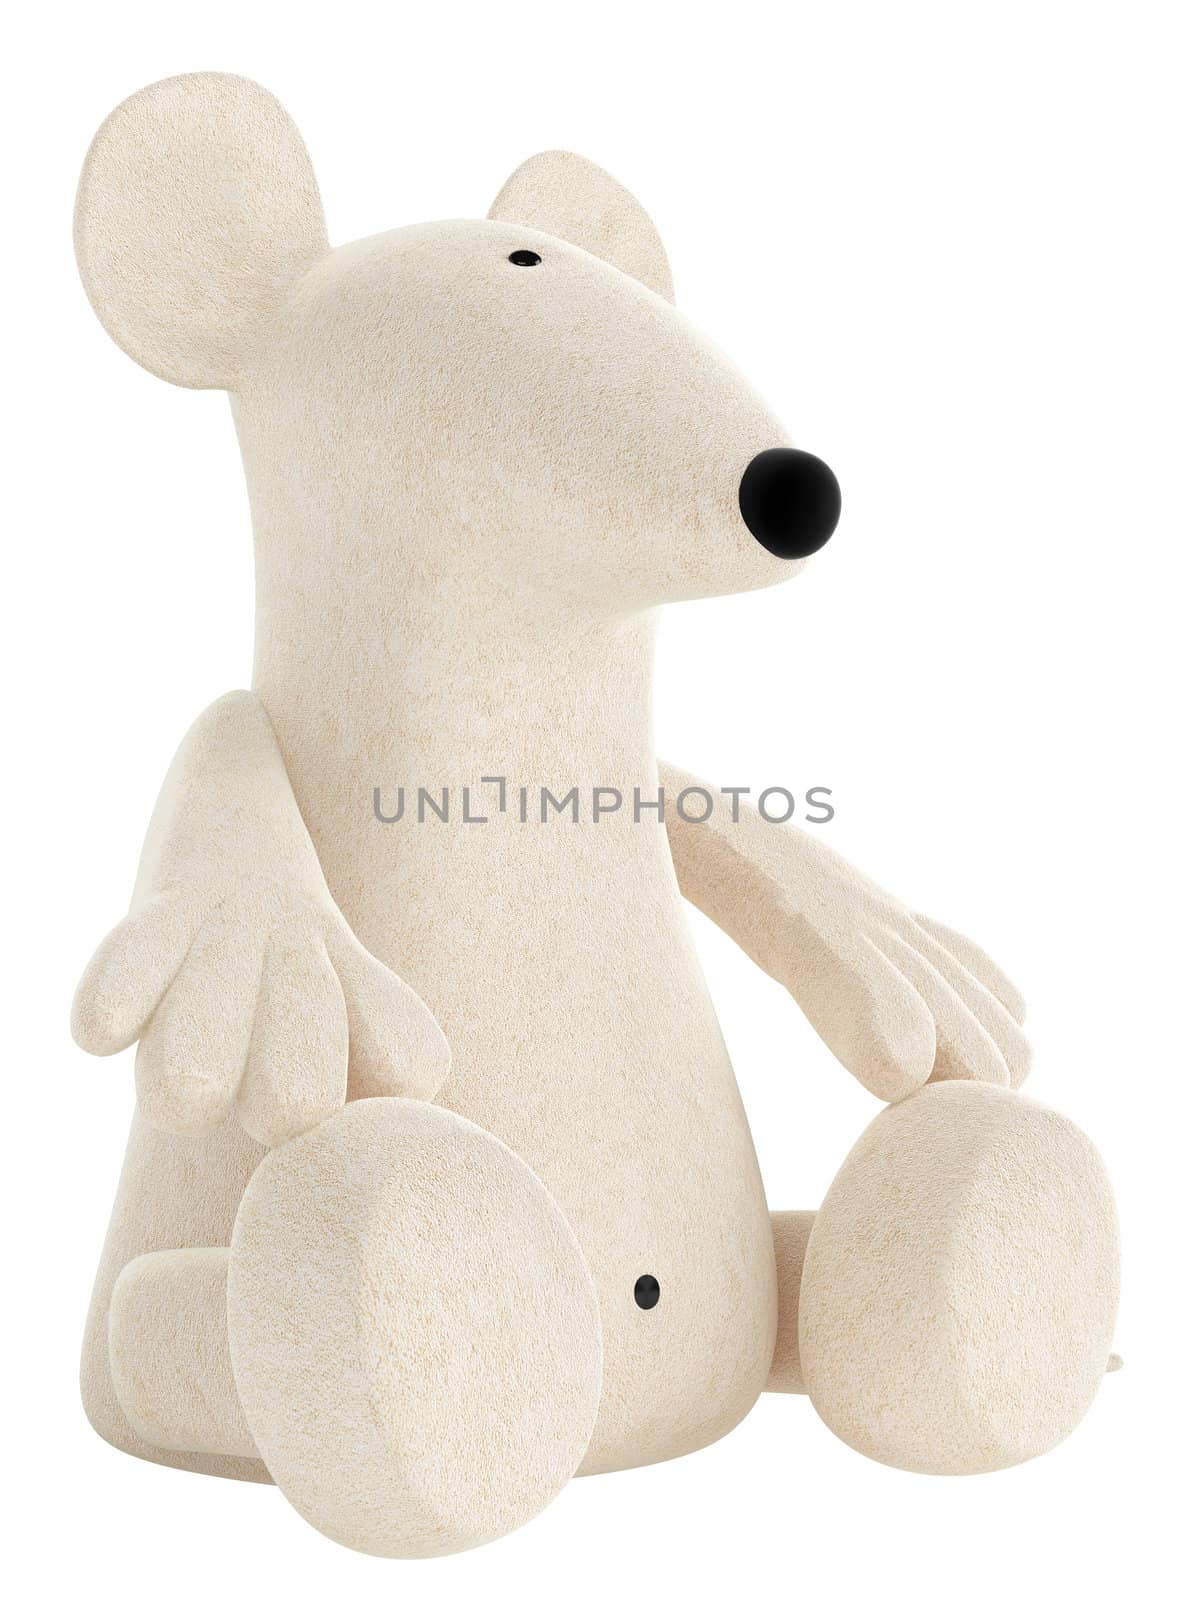 Cute white toy mouse or rat with a rather long nose sitting isolated on a white studio background